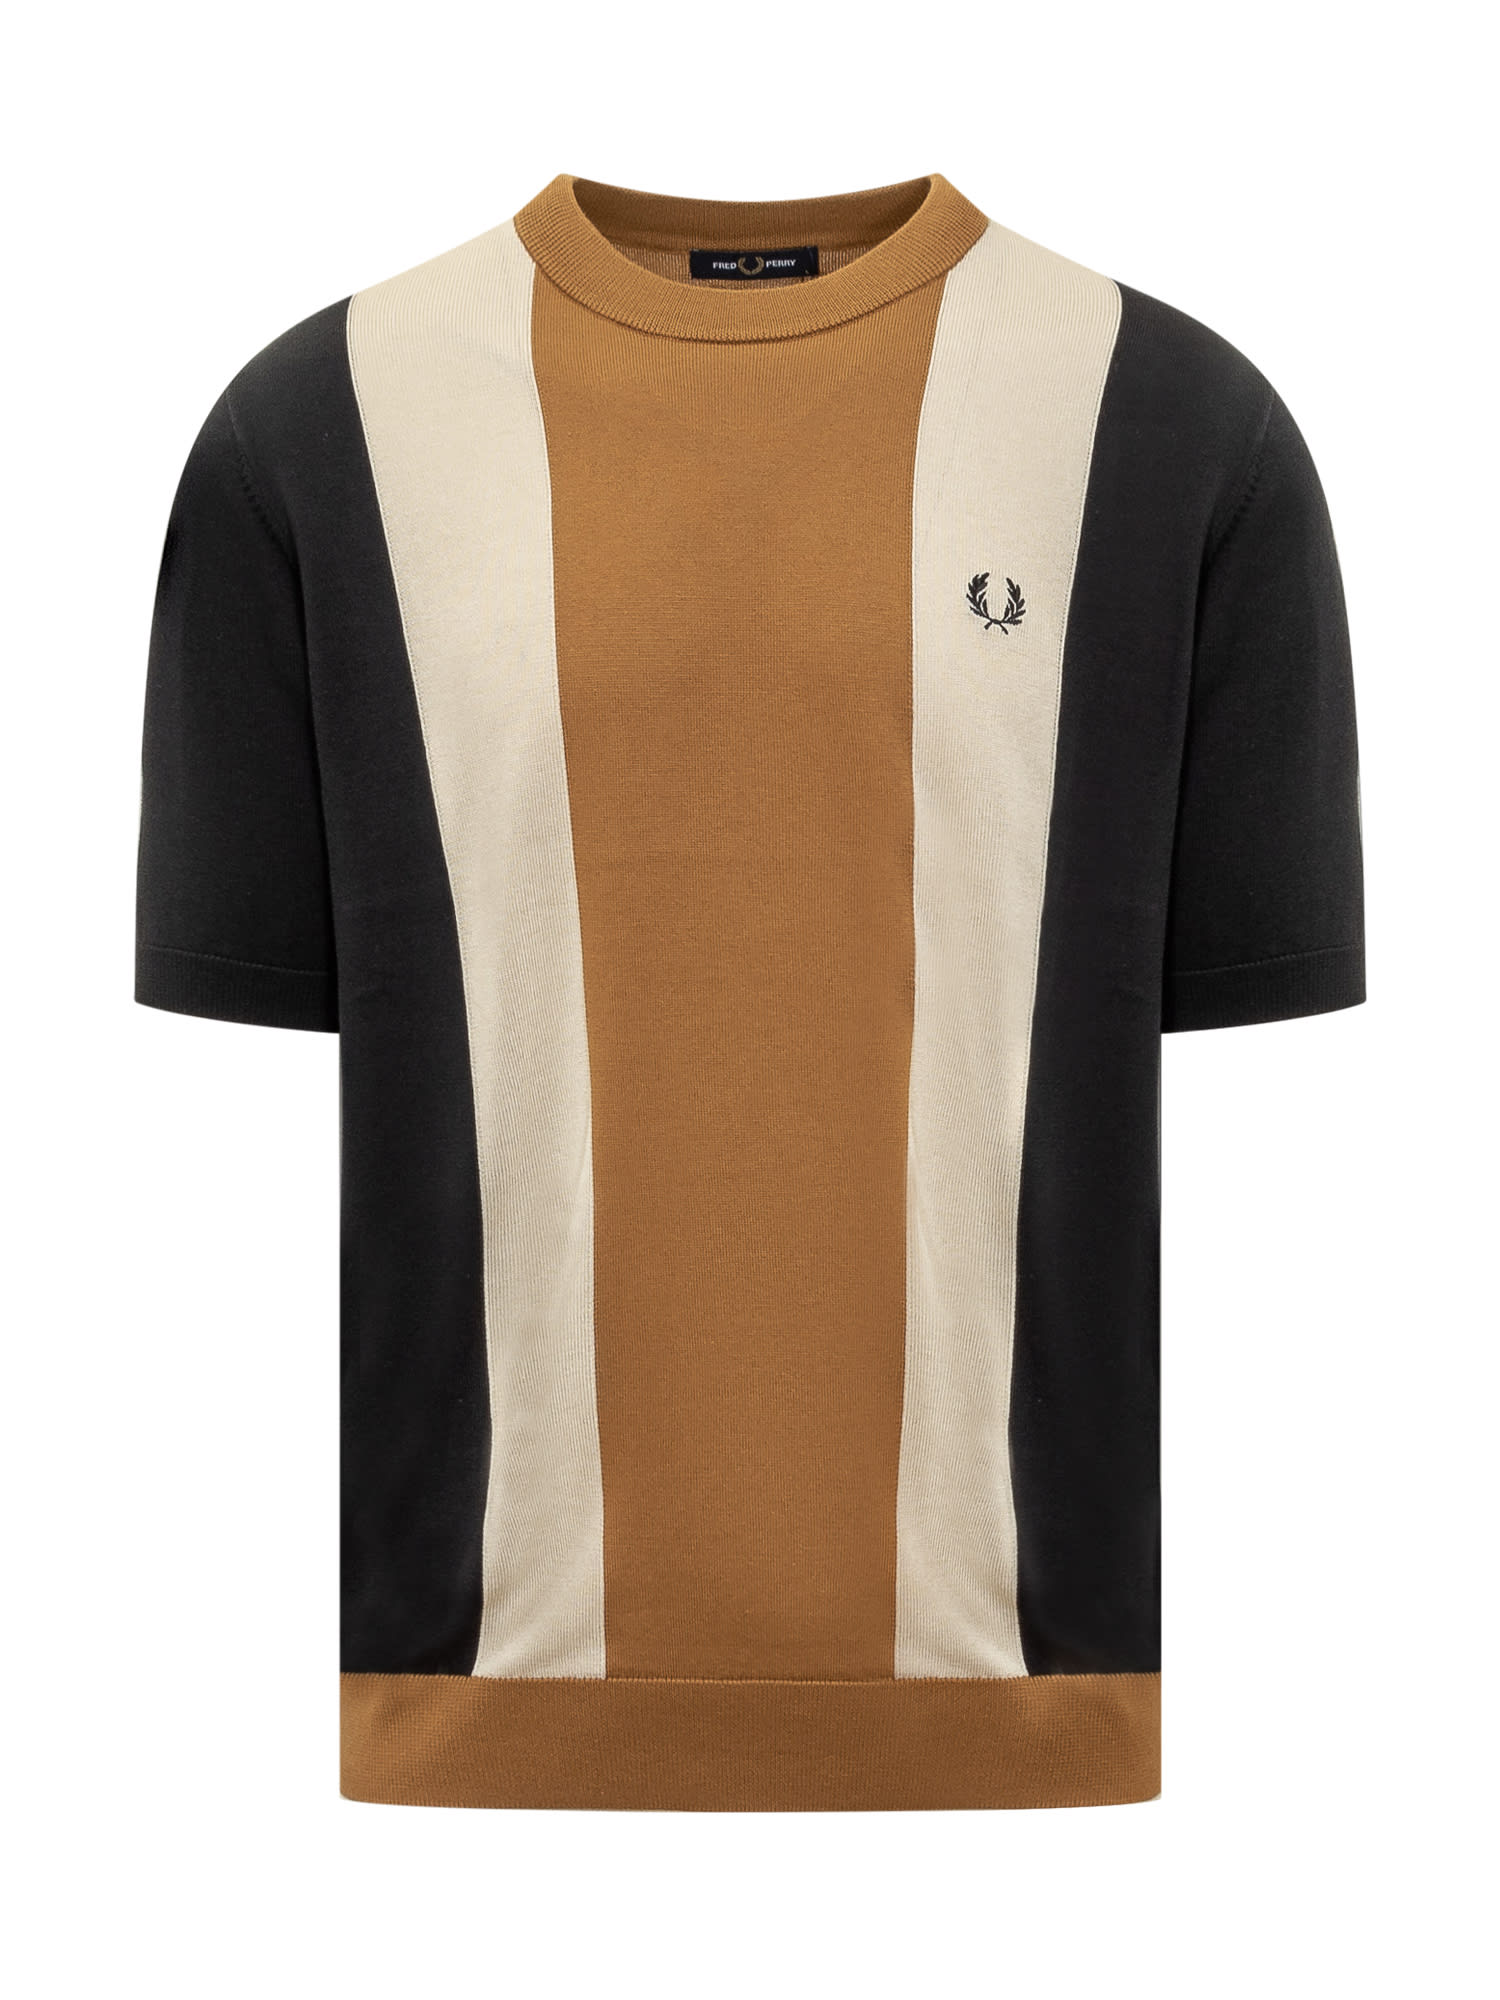 Shop Fred Perry Striped Knit T-shirt. In Rigato